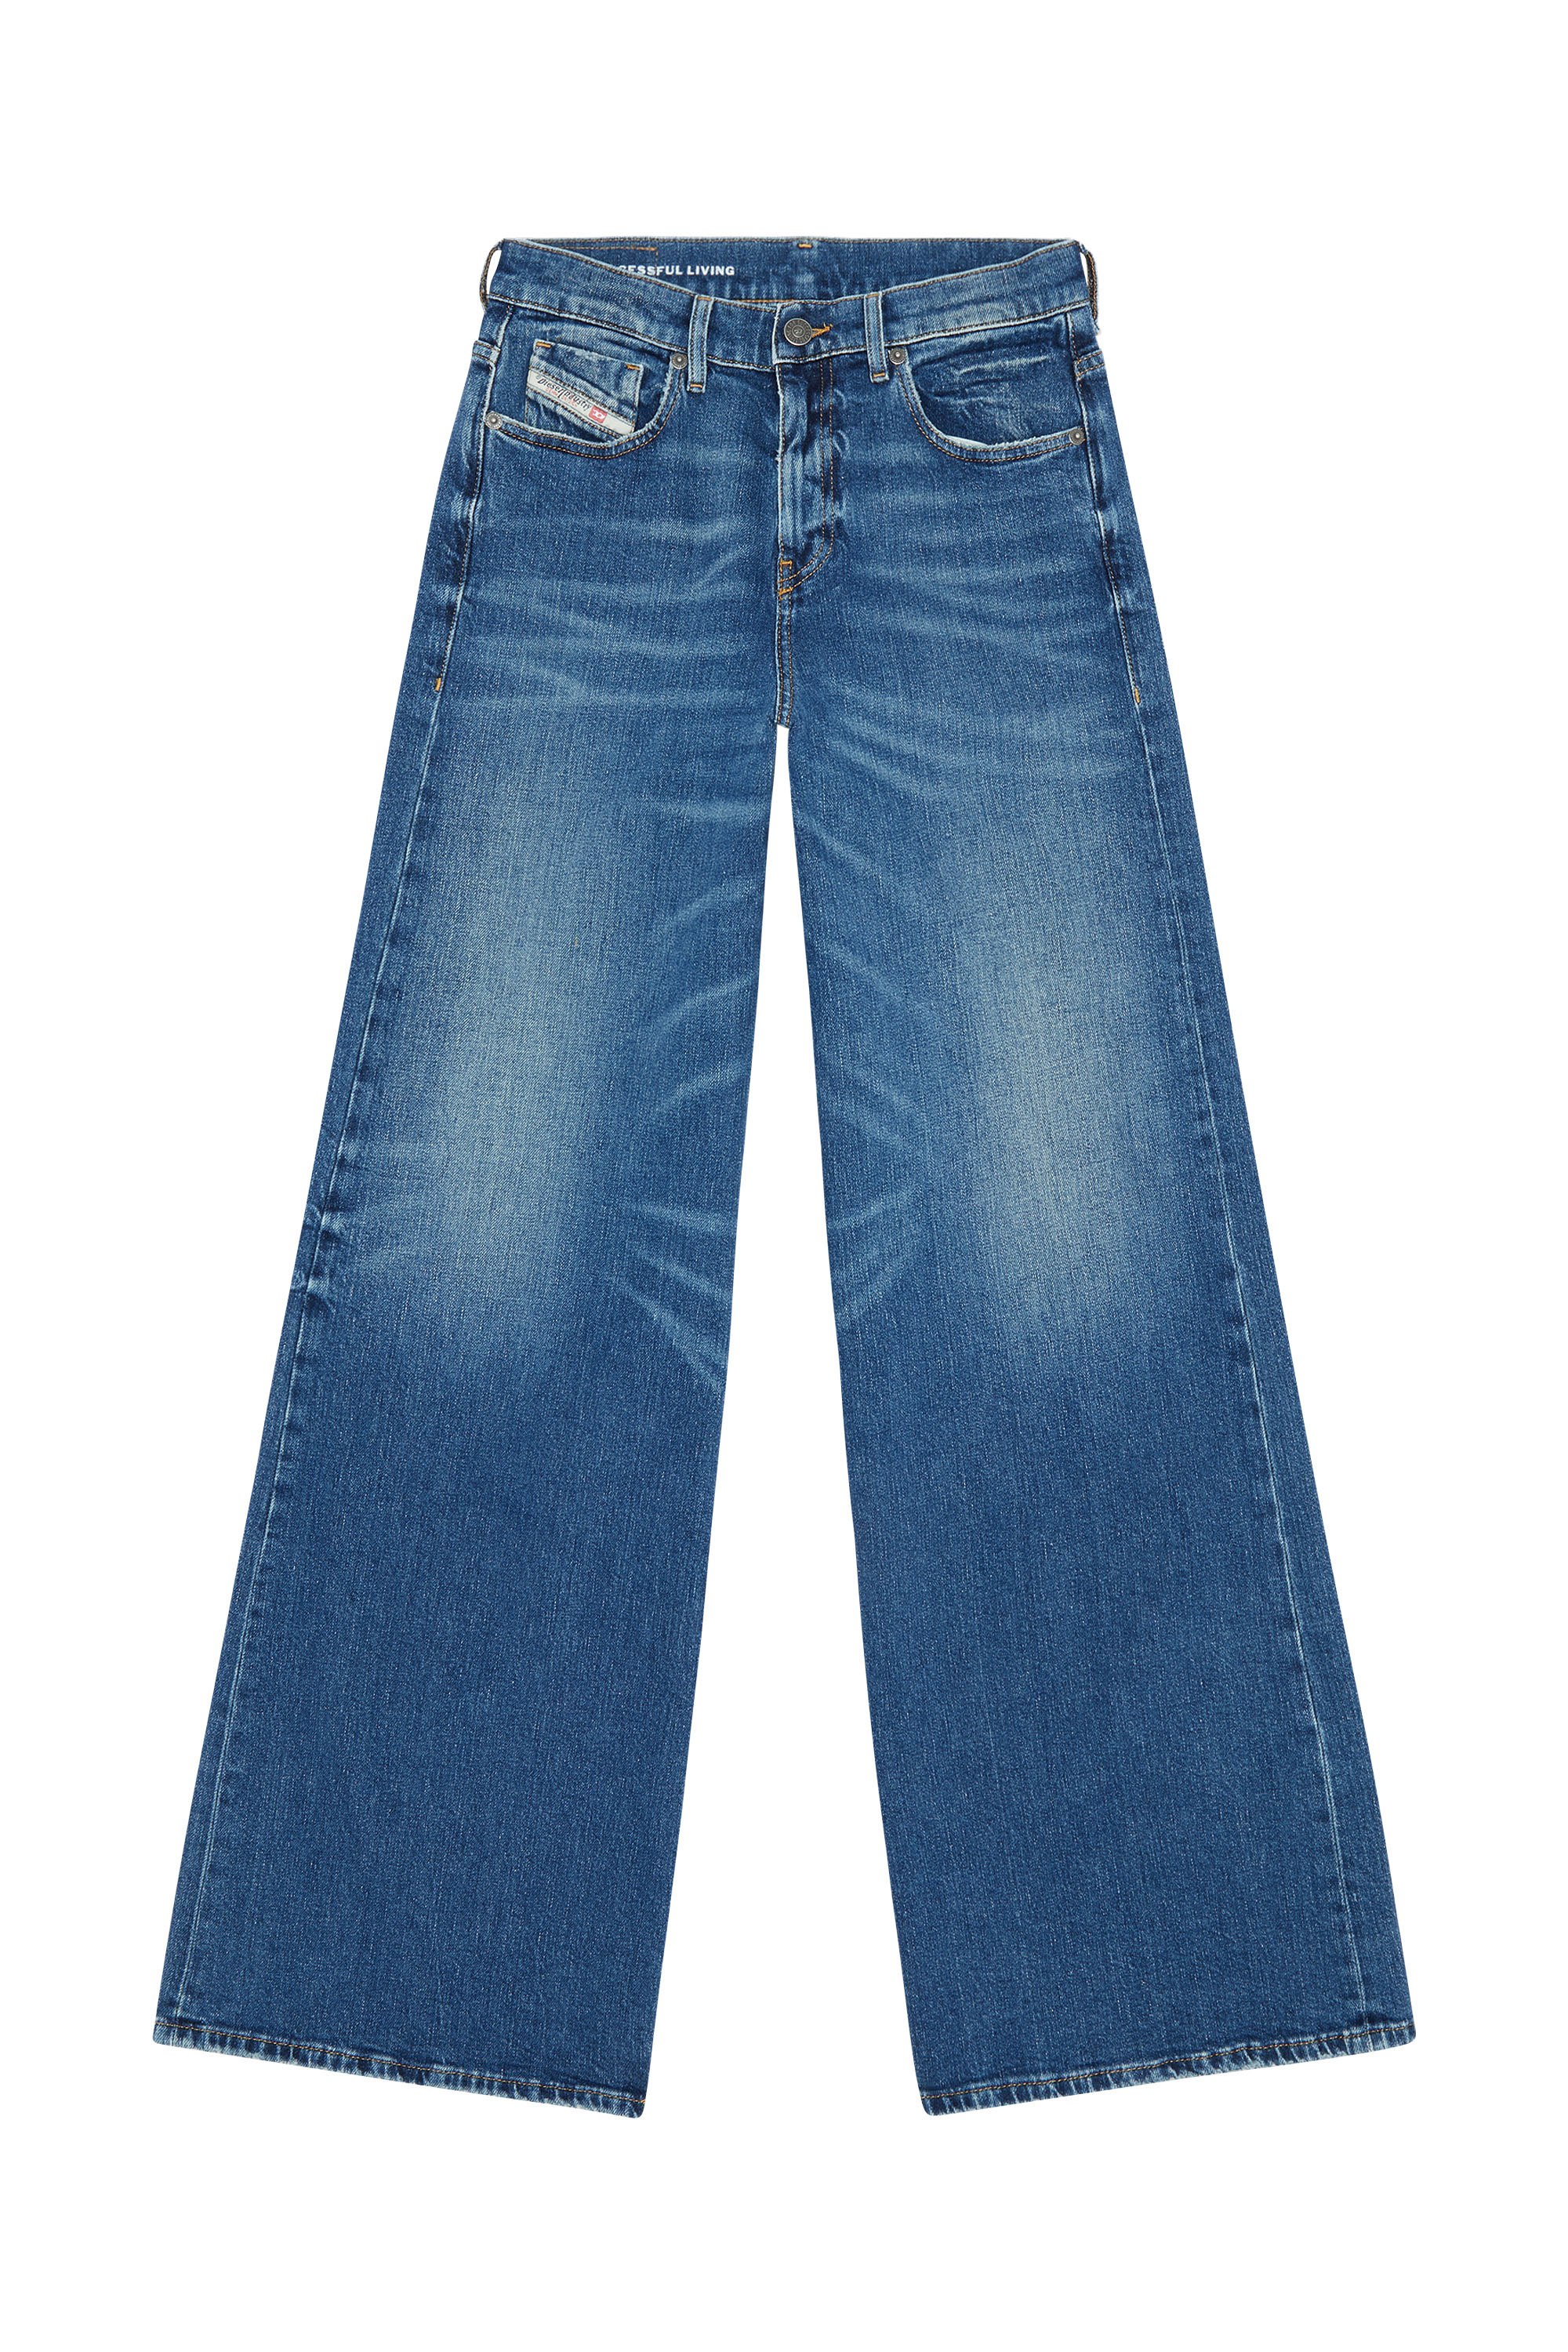 1978 007L1 Bootcut and Flare Jeans, Blu medio - Jeans